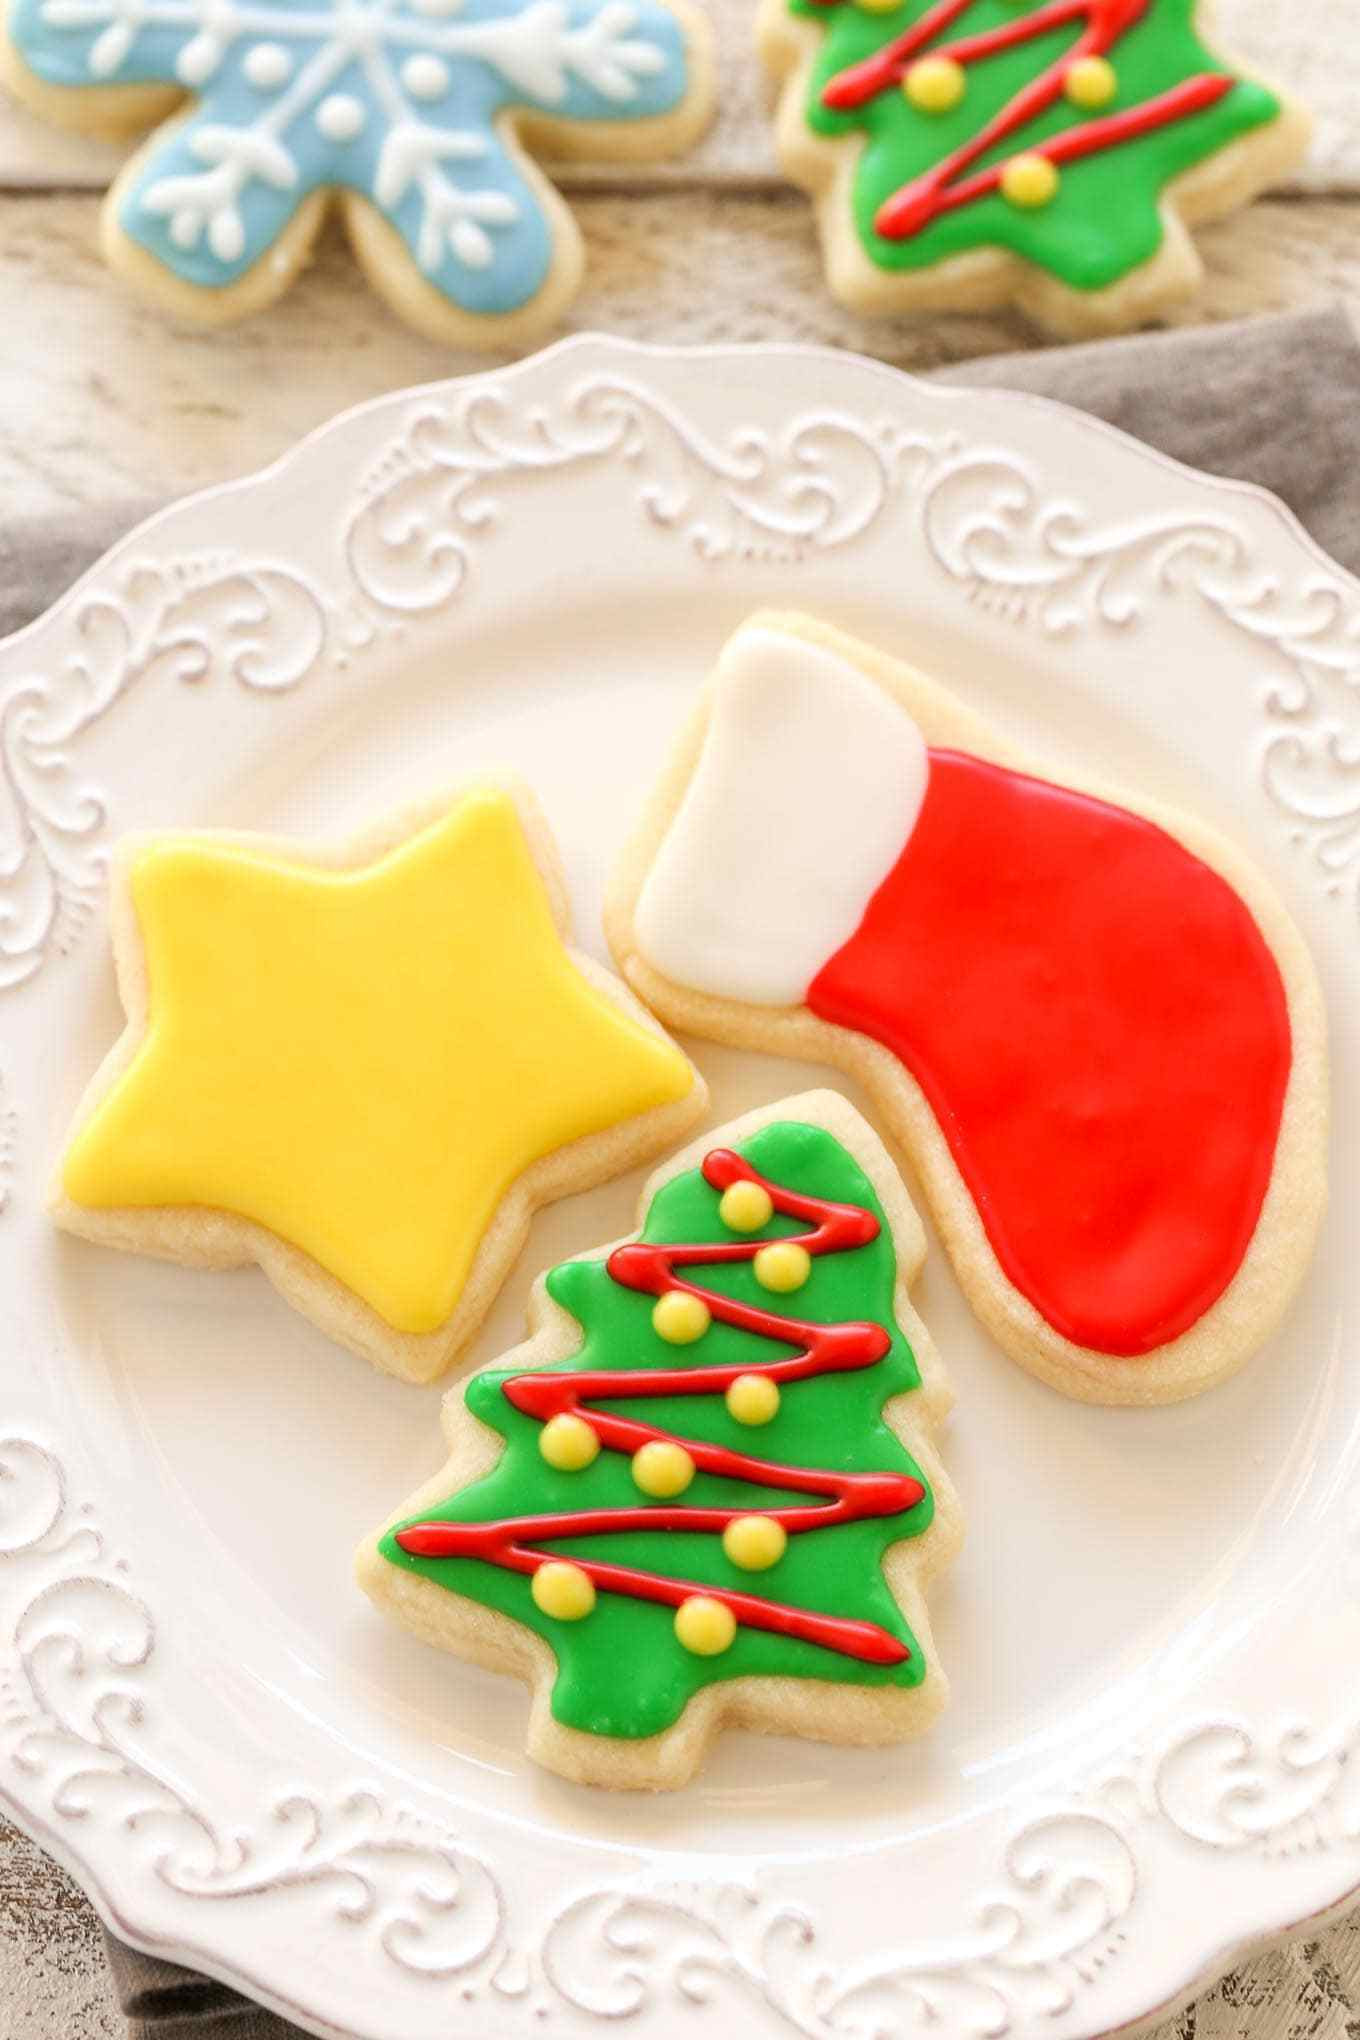 Decorated Christmas Cookies Recipes
 Soft Christmas Cut Out Sugar Cookies Live Well Bake ten